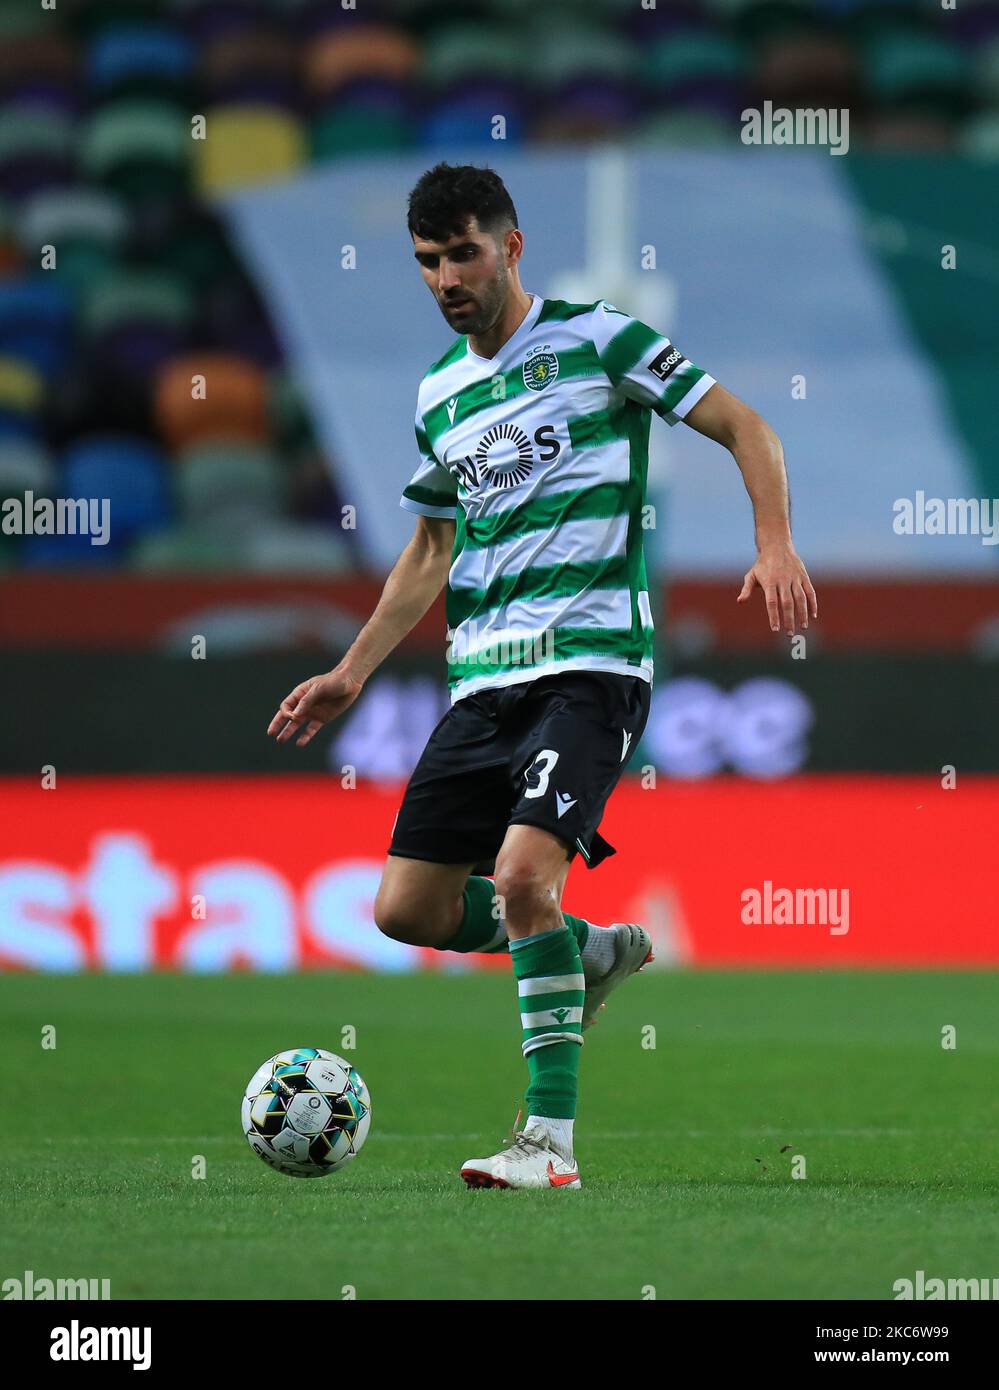 Luis Neto of Sporting CP in action during the Liga NOS match between Sporting CP and SC Braga at Estadio Jose Alvalade on January 2, 2021 in Lisbon, Portugal. (Photo by Paulo Nascimento/NurPhoto) Stock Photo